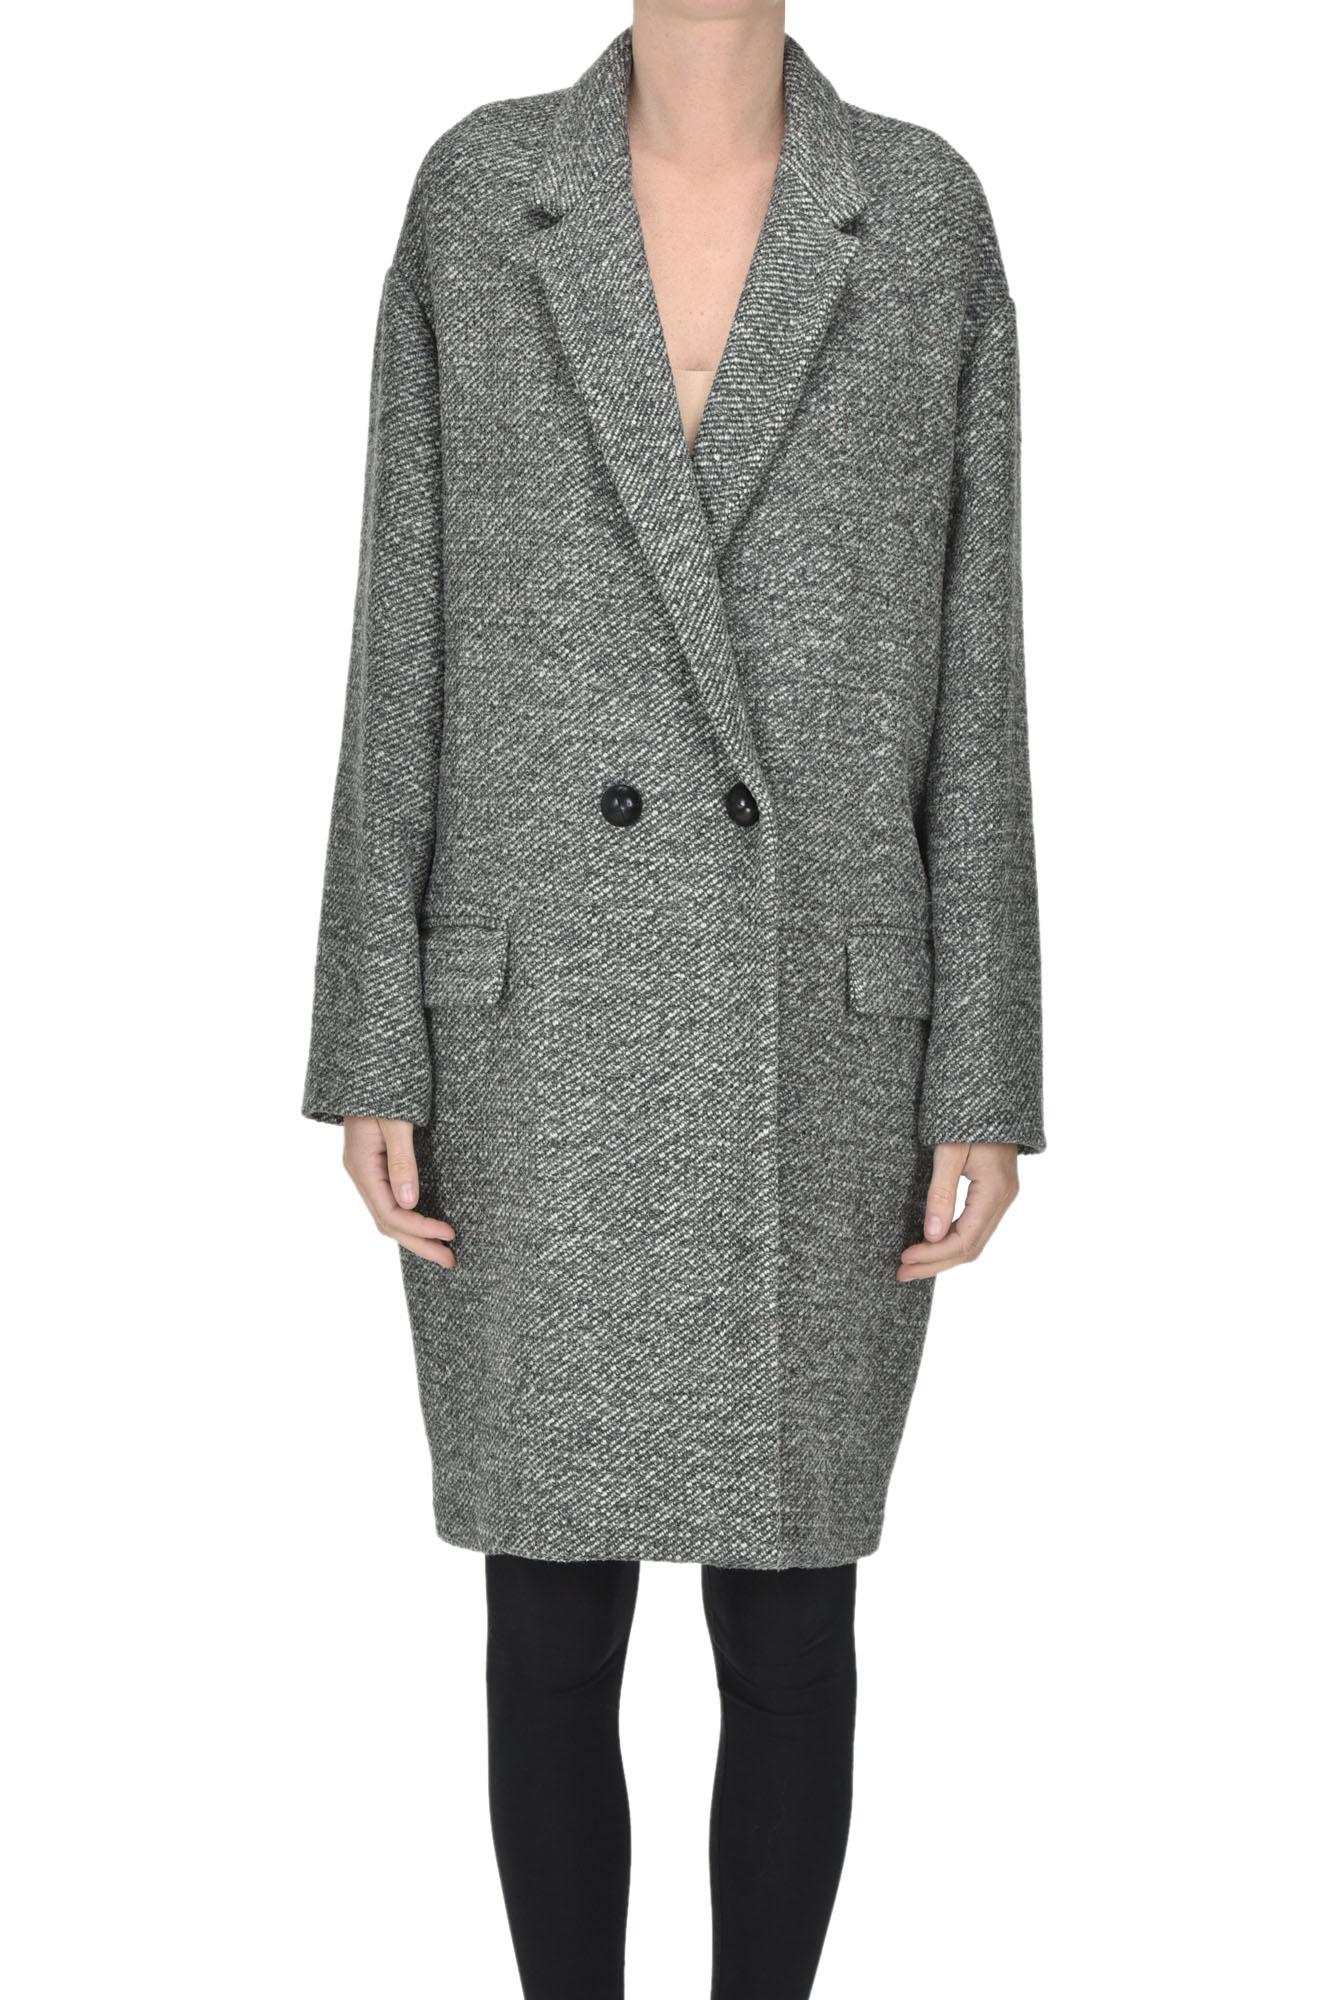 Isabel Marant Filipo Double-breasted Coat in Gray | Lyst